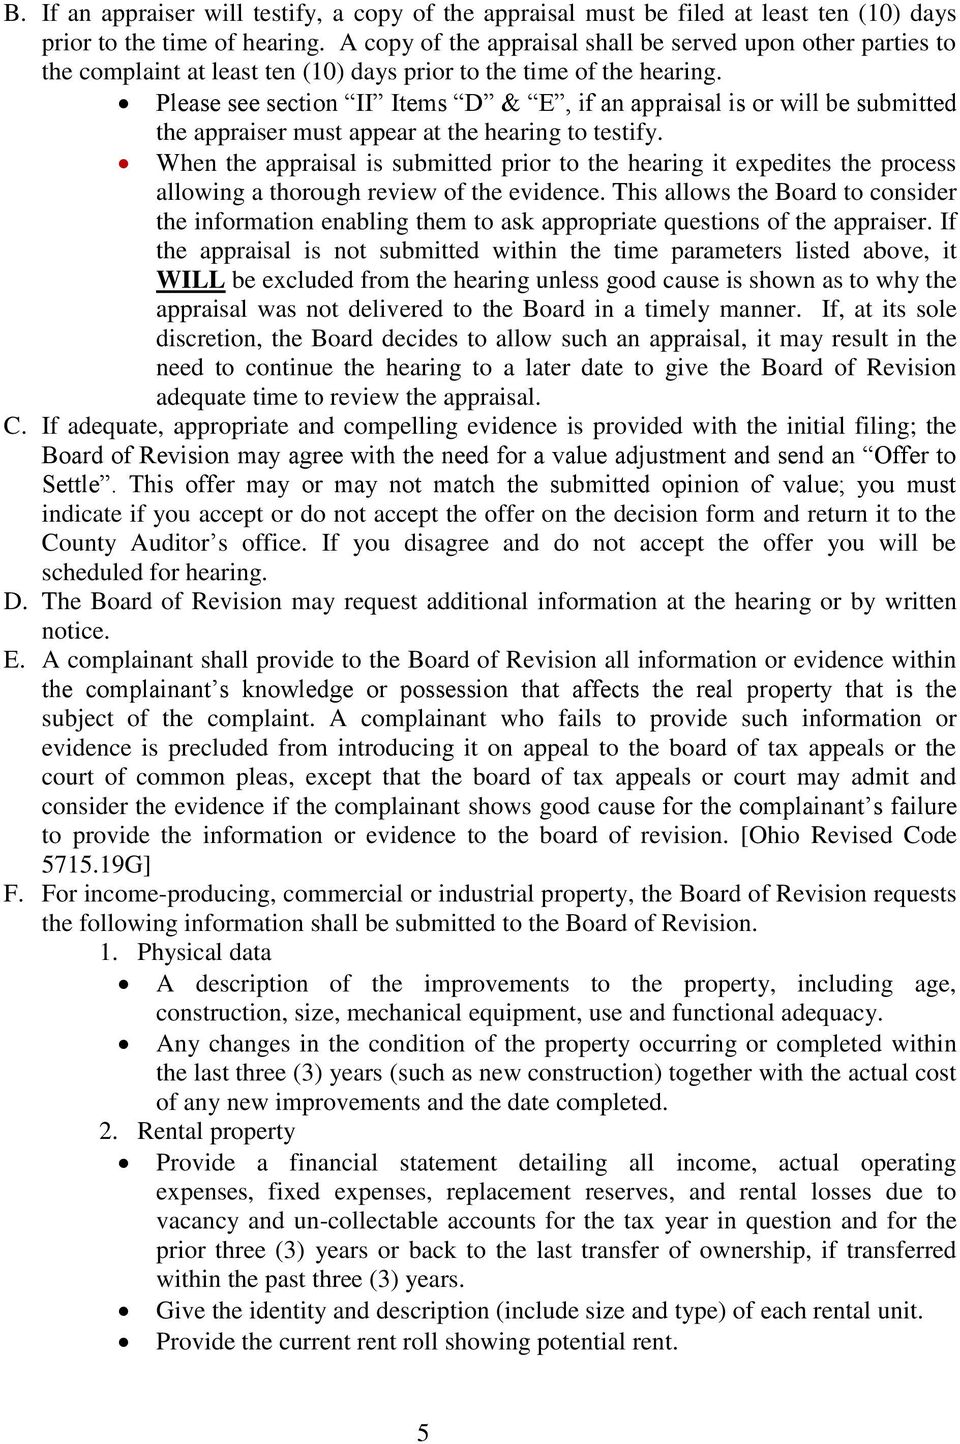 Please see section II Items D & E, if an appraisal is or will be submitted the appraiser must appear at the hearing to testify.